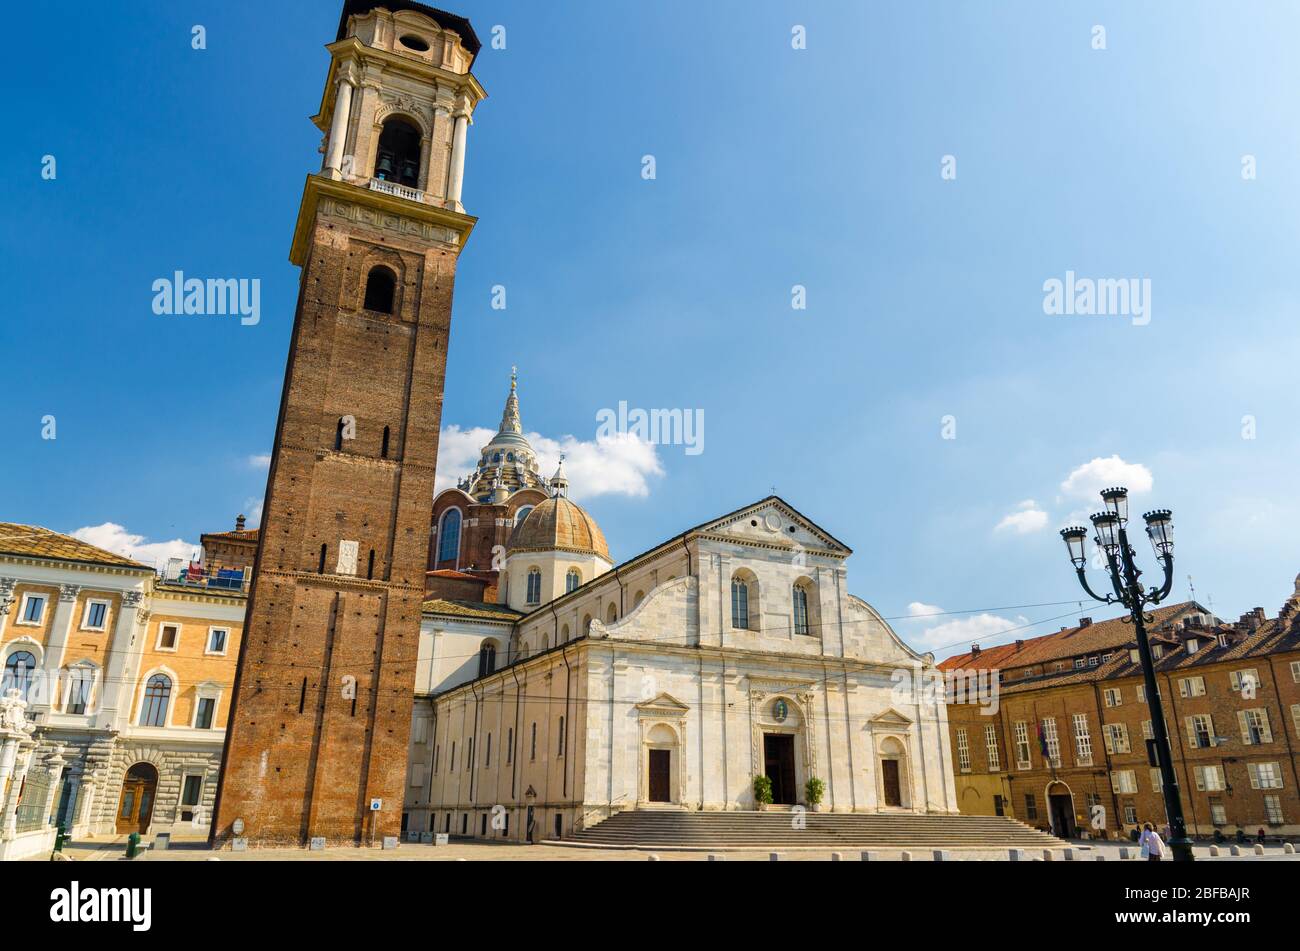 Duomo di Torino San Giovanni Battista catholic cathedral where the Holy Shroud of Turin is rested with bell tower and Sacra Sindone chapel on square i Stock Photo